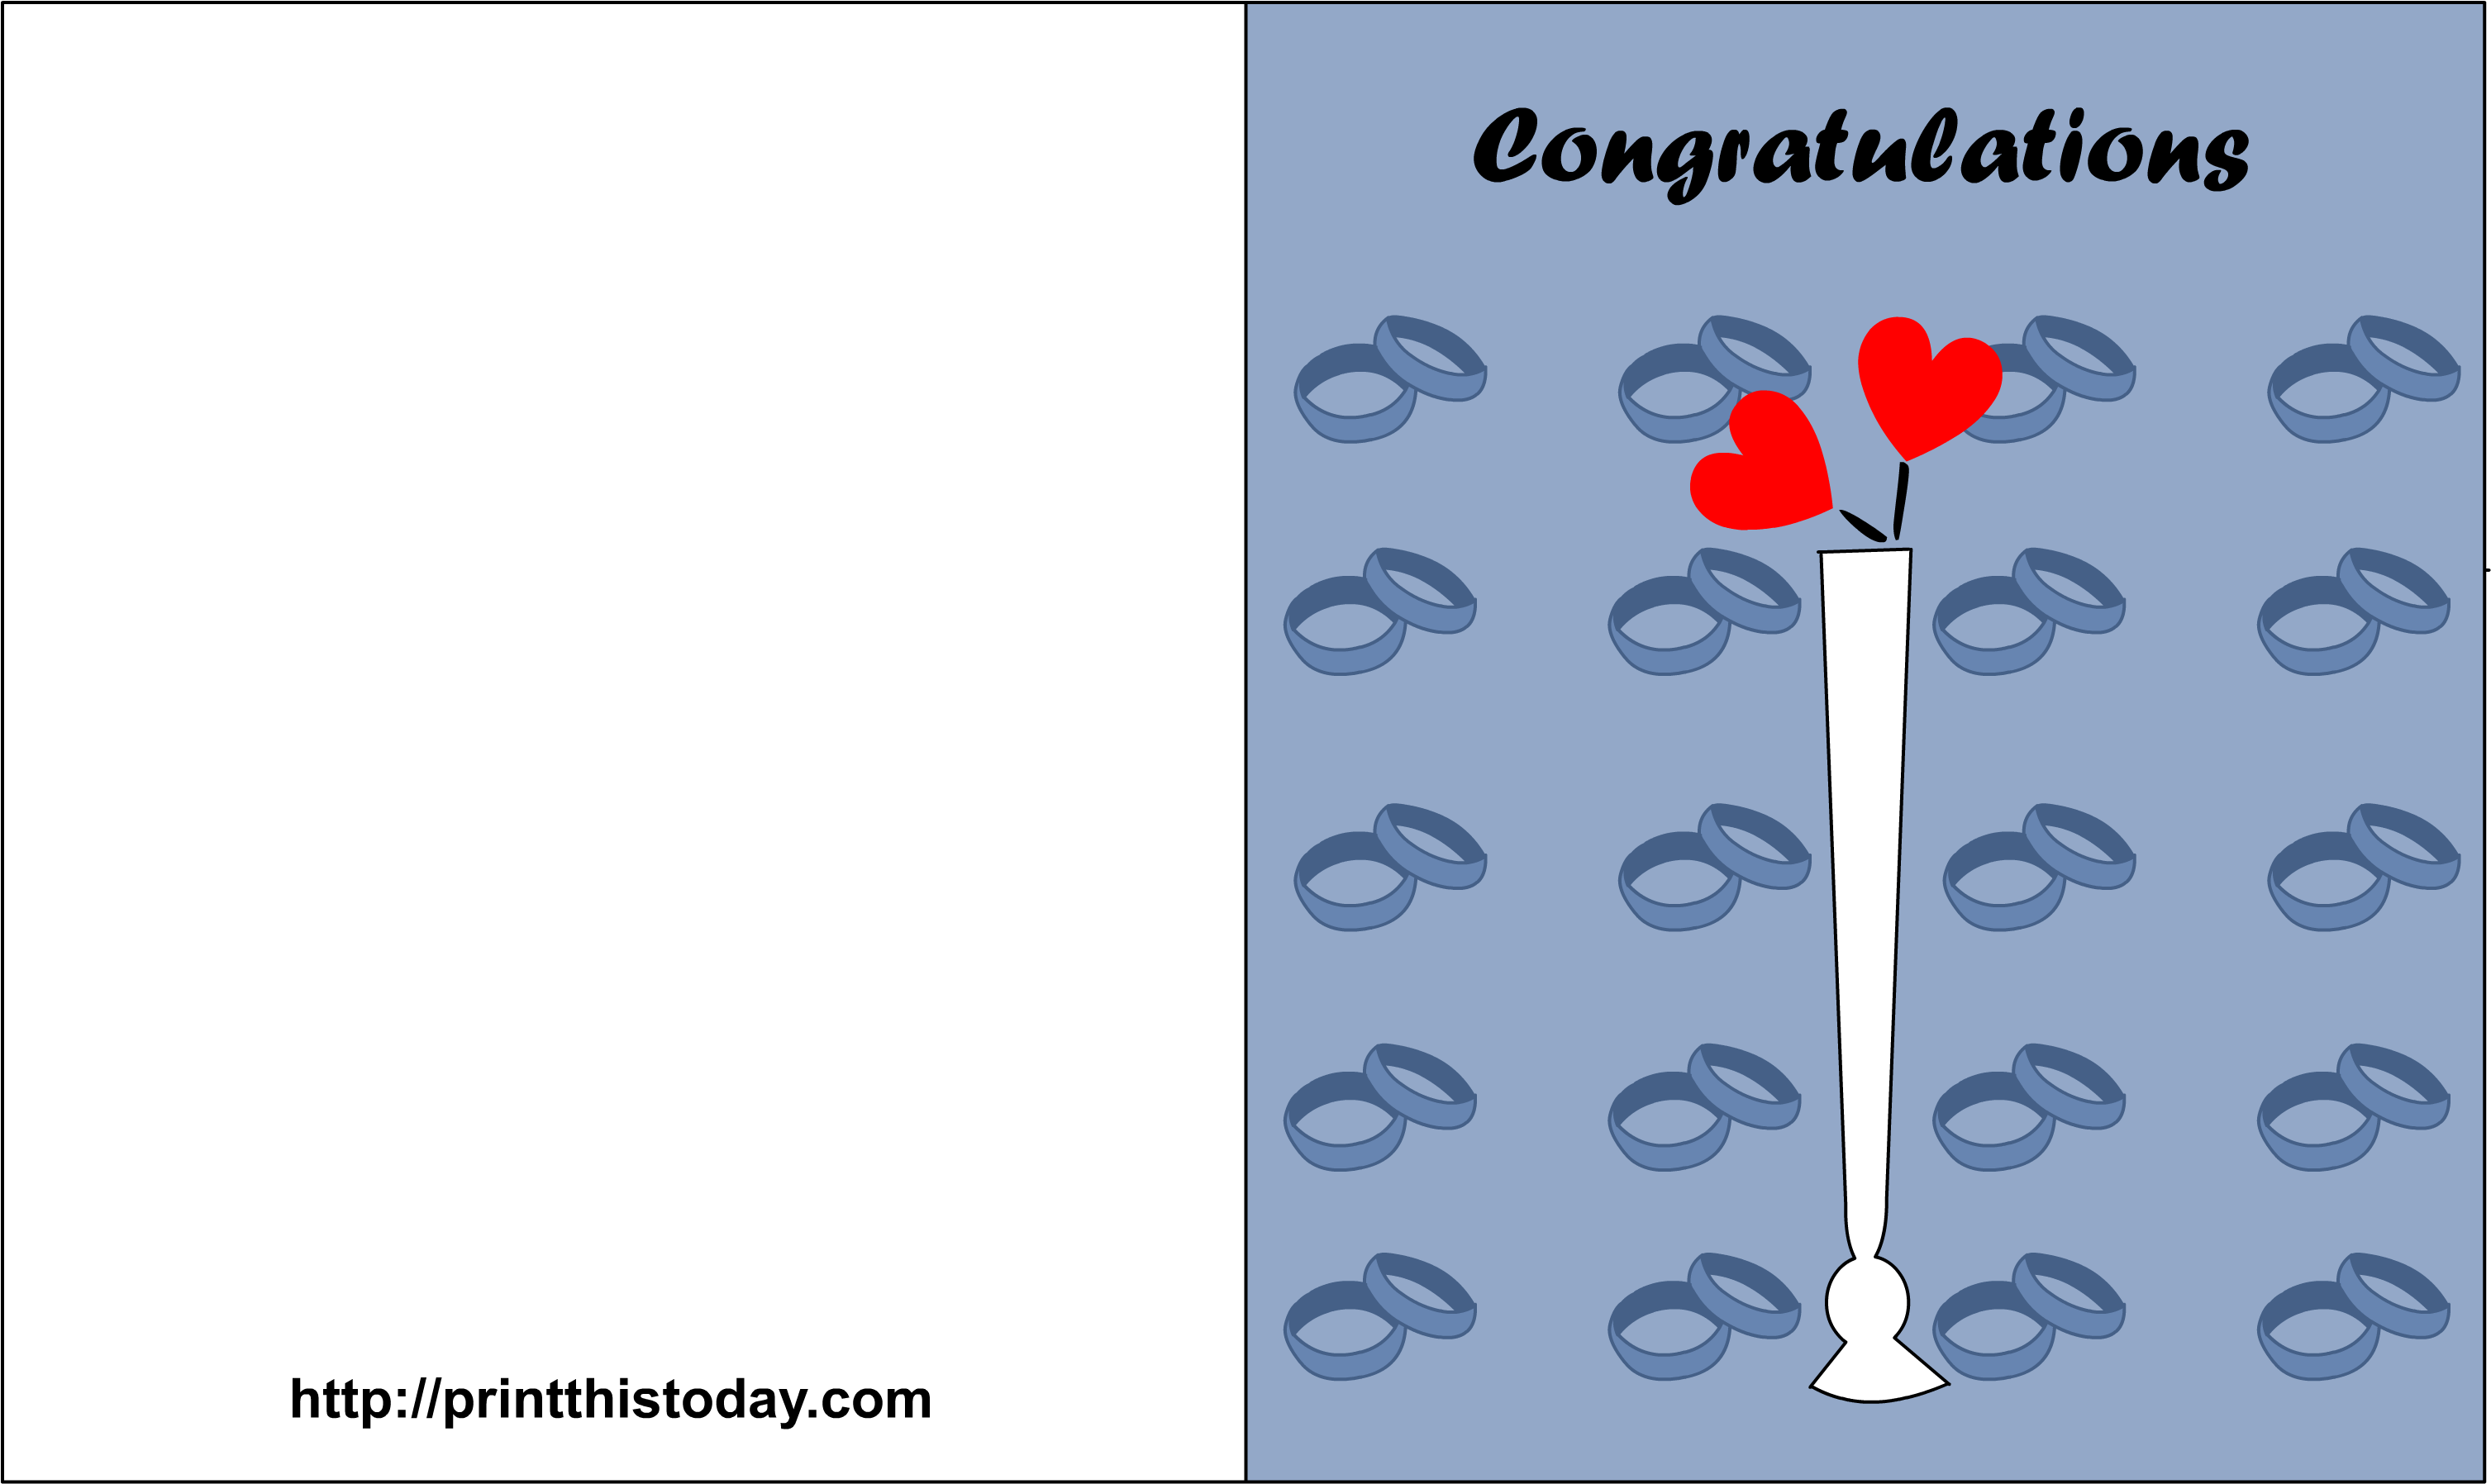 Free Printable Wedding Card With Hearts And Rings - Greeting Card (3300x2550)